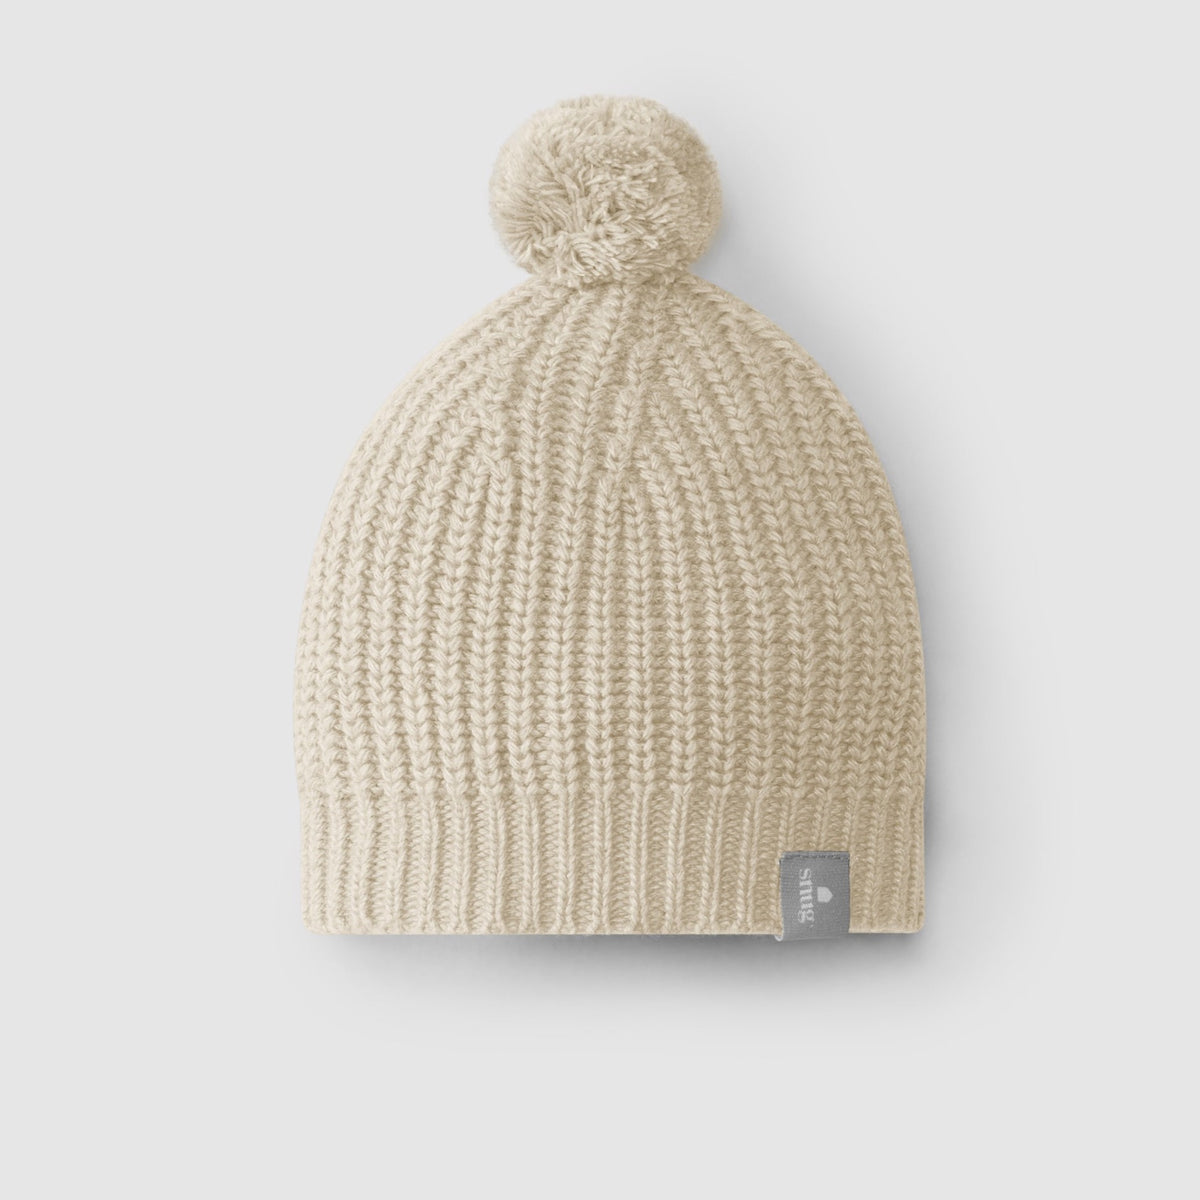 Knitted Hat with Pom-Pom